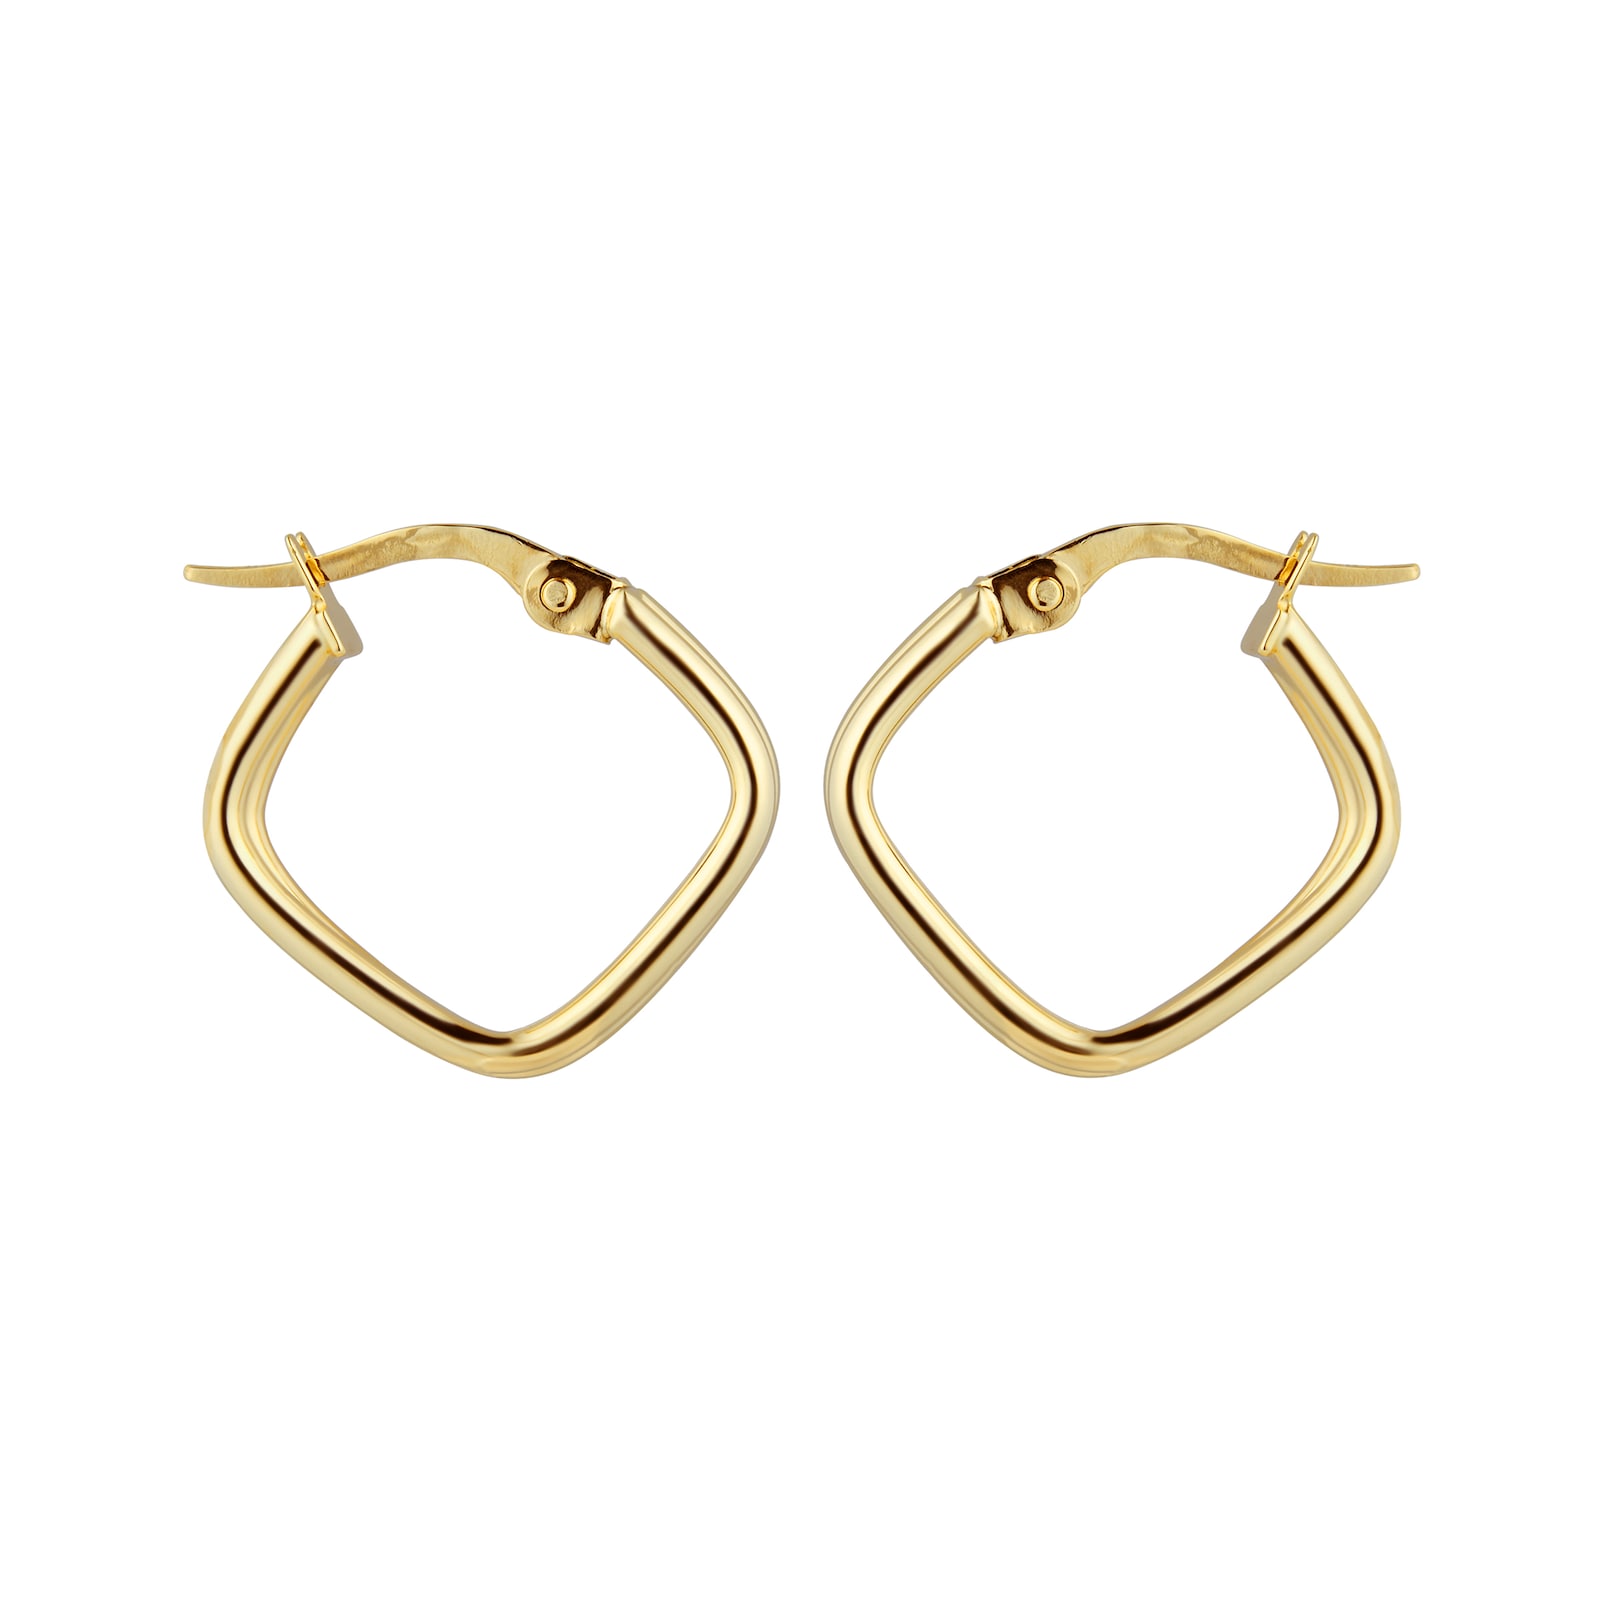 Goldsmiths 9ct Yellow Gold Double Row Square Hoop Earrings GHE347GS ...